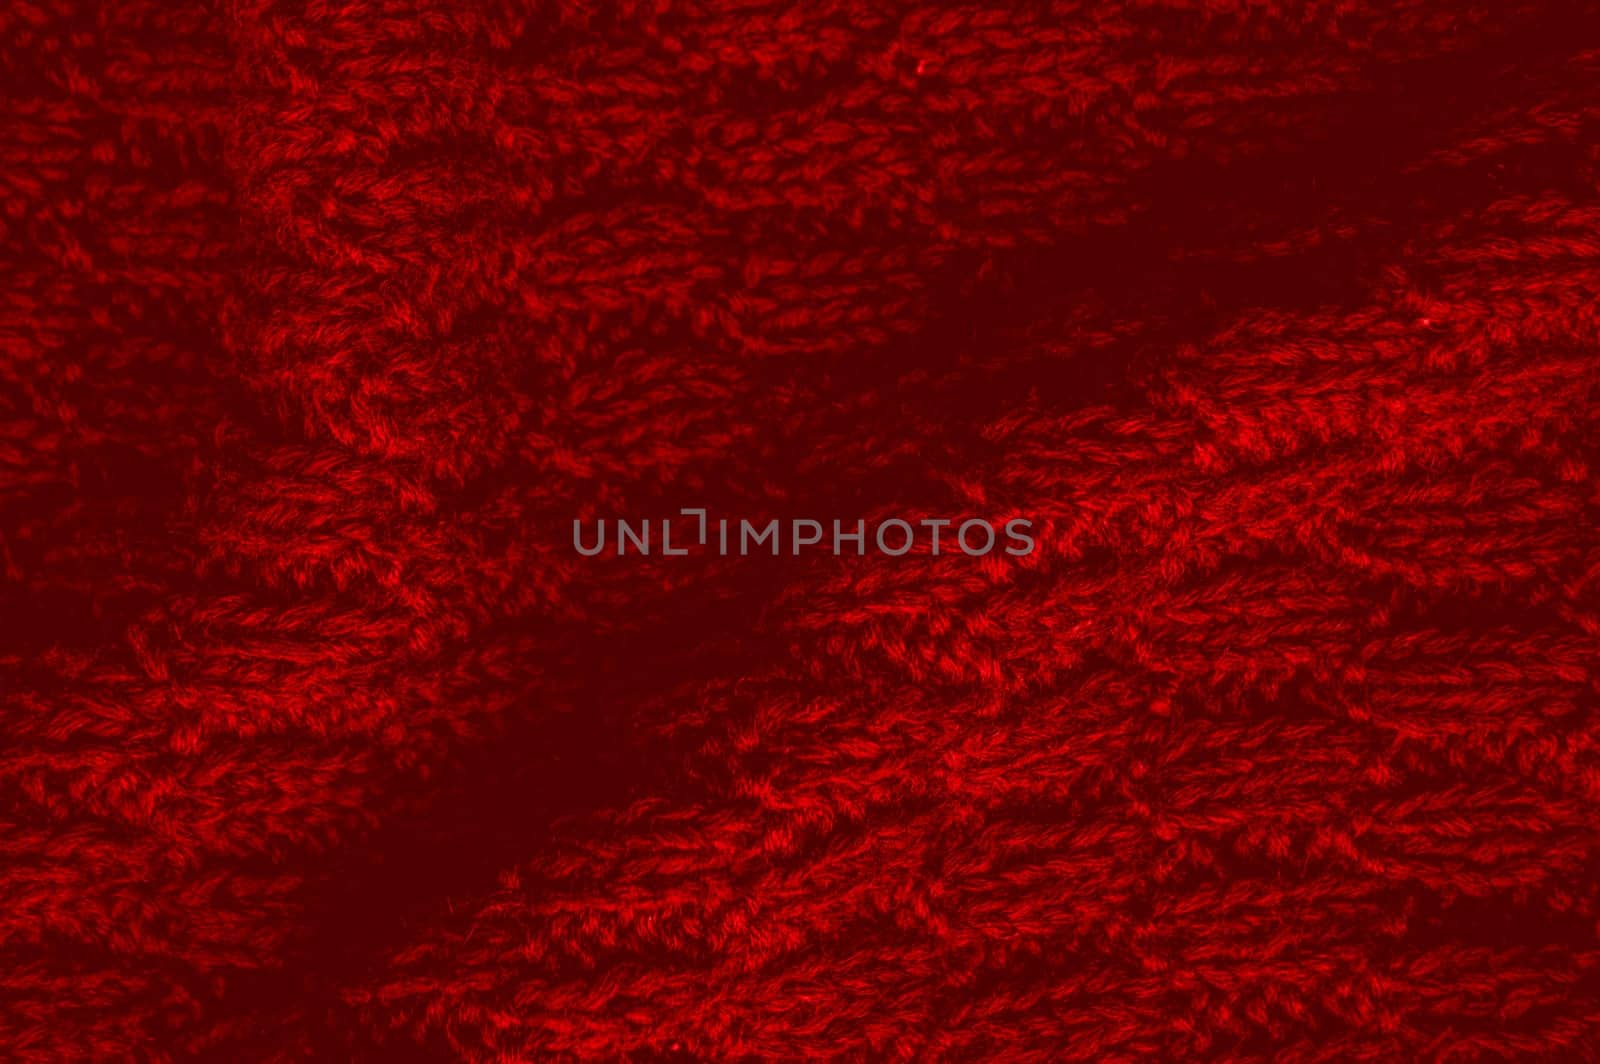 Detail Abstract Wool. Vintage Woven Pullover. Structure Handmade Winter Background. Macro Knitted Wool. Red Closeup Thread. Nordic Xmas Print. Fiber Blanket Cashmere. Knitted Fabric.